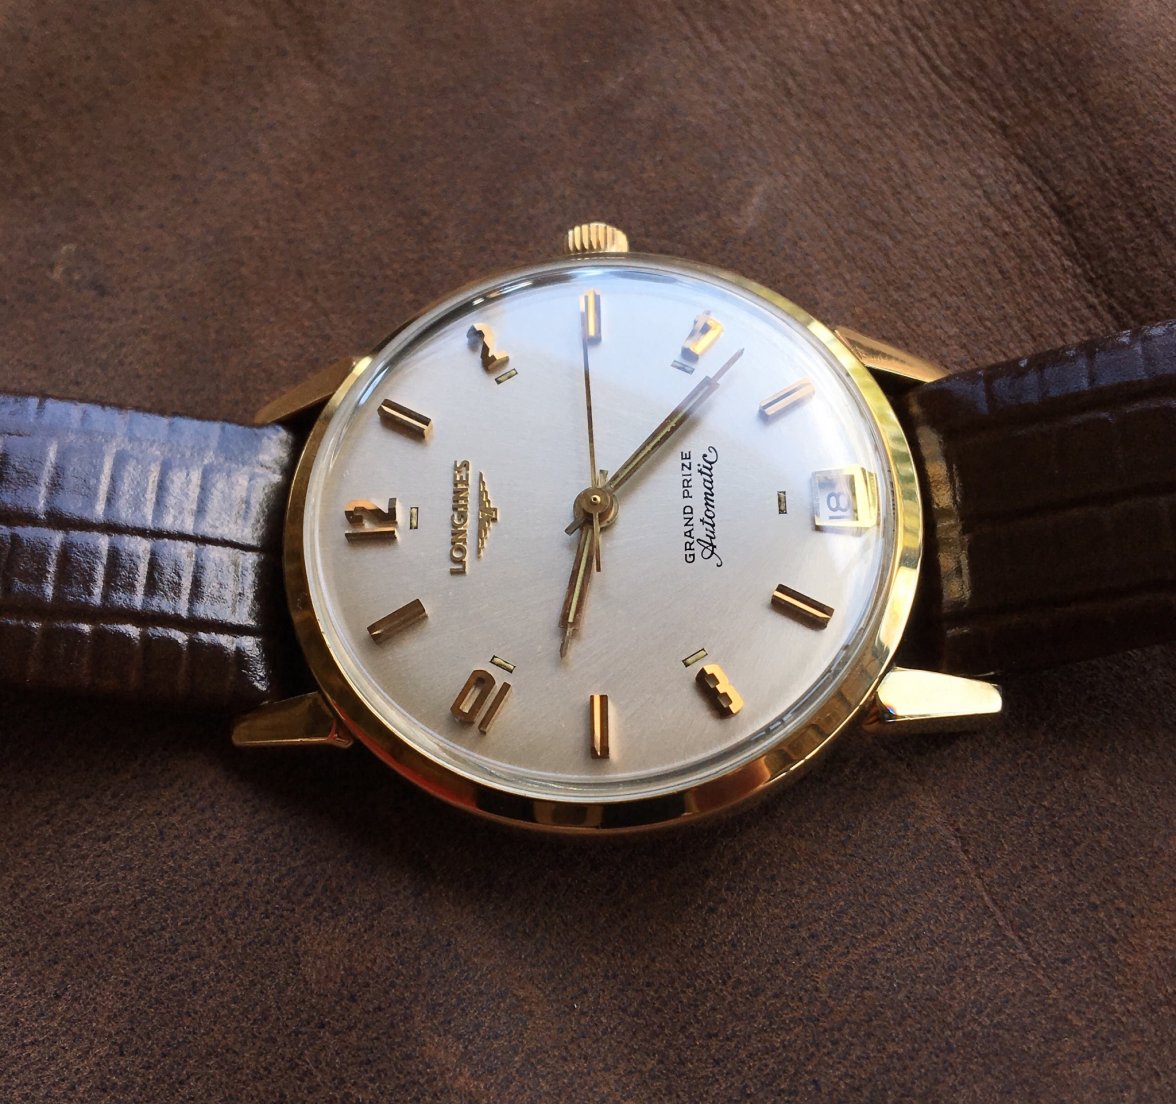 SOLD - 1966 Longines Admiral Grand Prize Automatic, Excellent, $650 ...